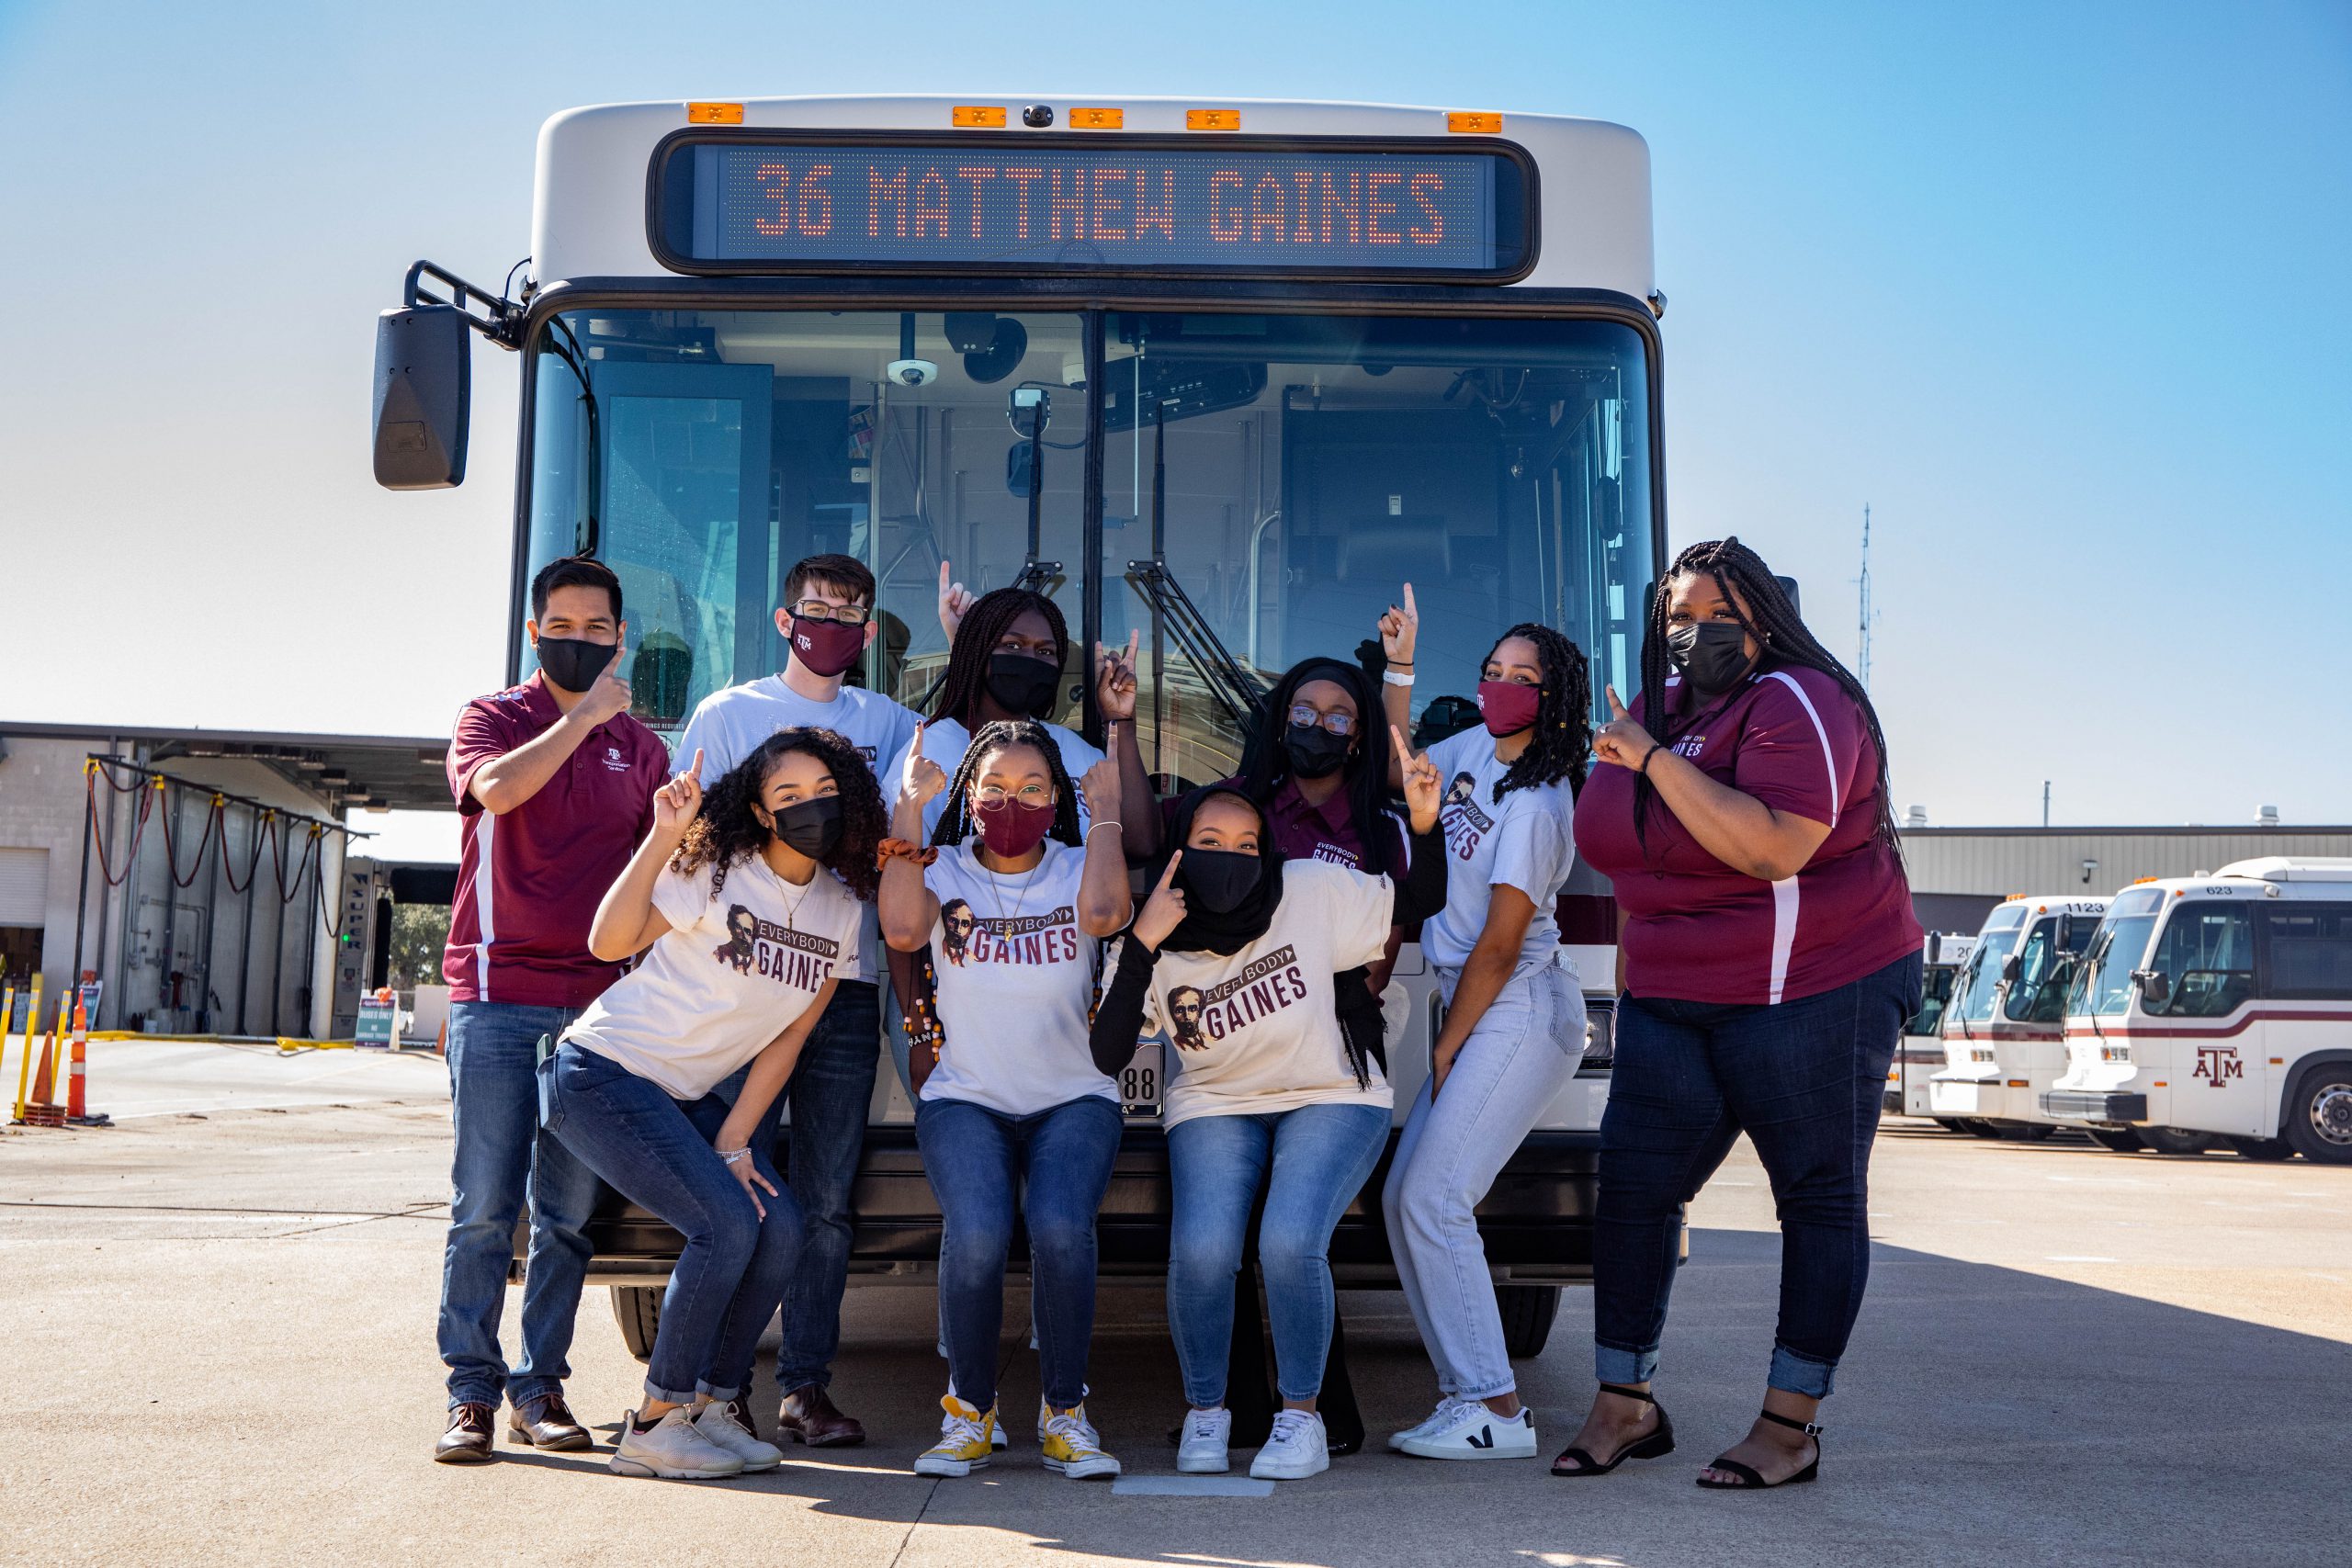 Image of the Matthew Gaines Society in front of an Aggie Spirit Bus displaying the newly named Matthew Gaines route on the bus marquee.